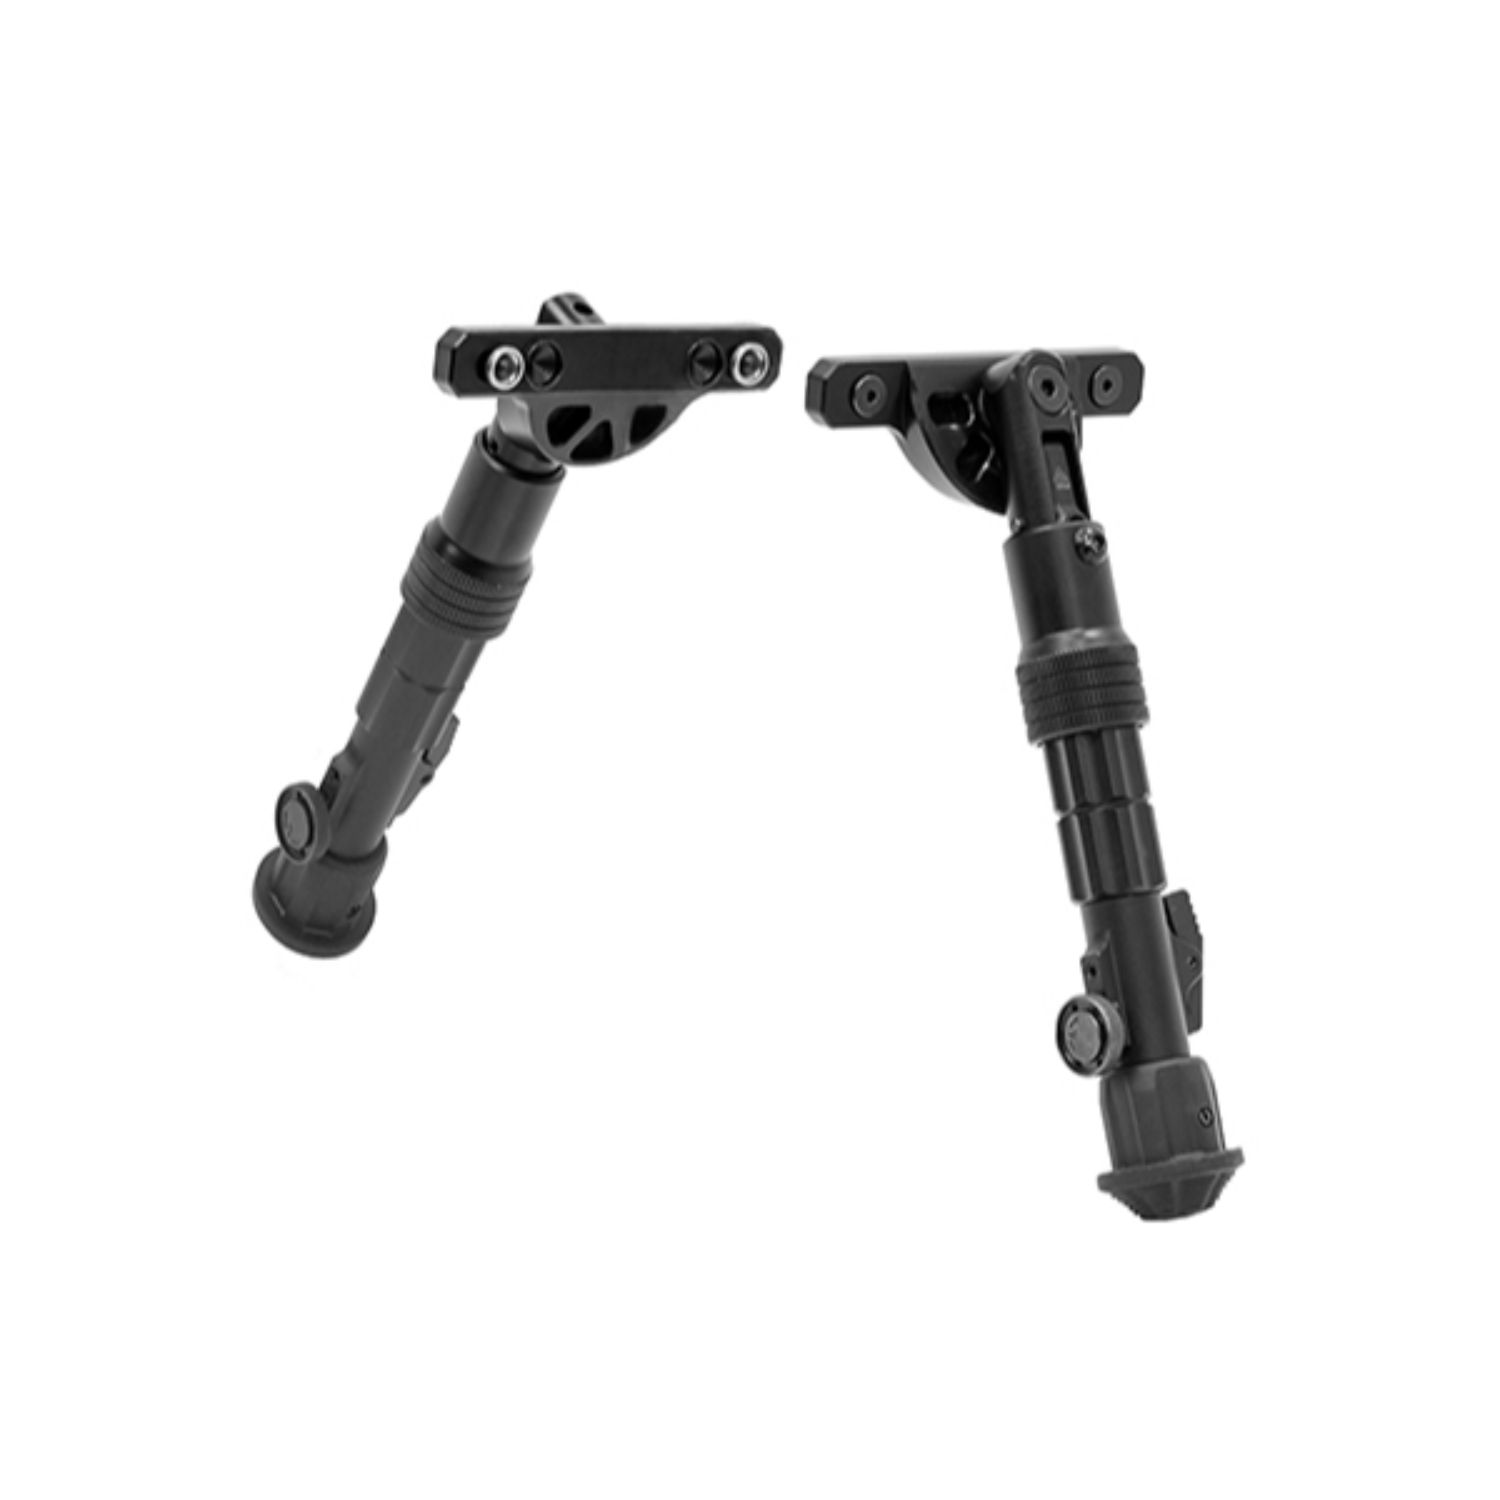 Leapers UTG Recon Flex Keymod Bipod 5.7-8in Center Height